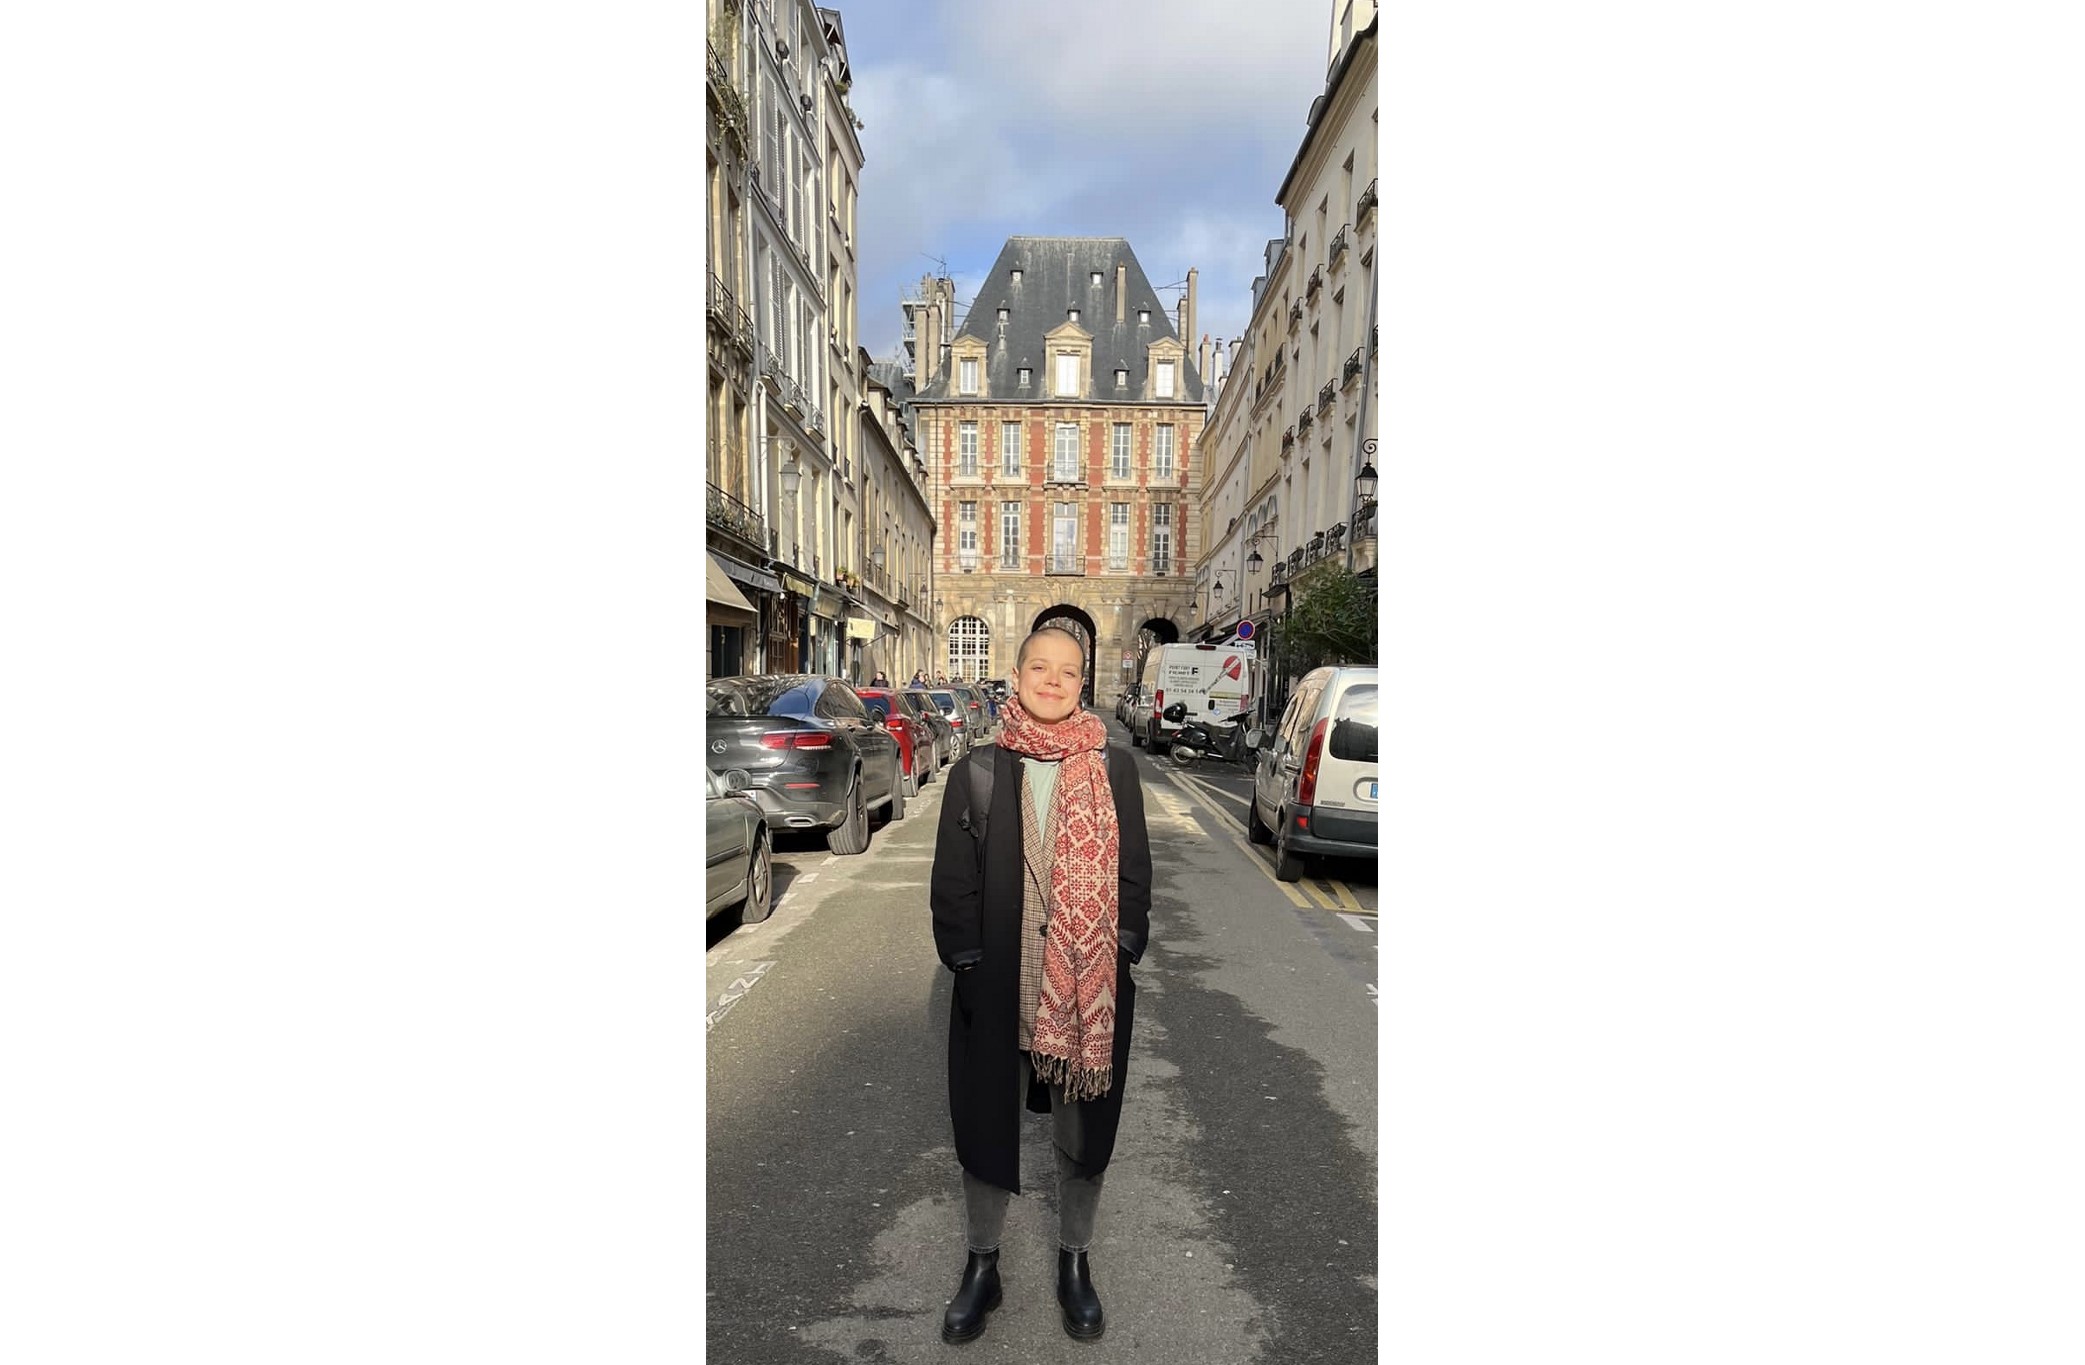 Julie Flandreau in Paris, specifically outside the Maison Victor Hugo